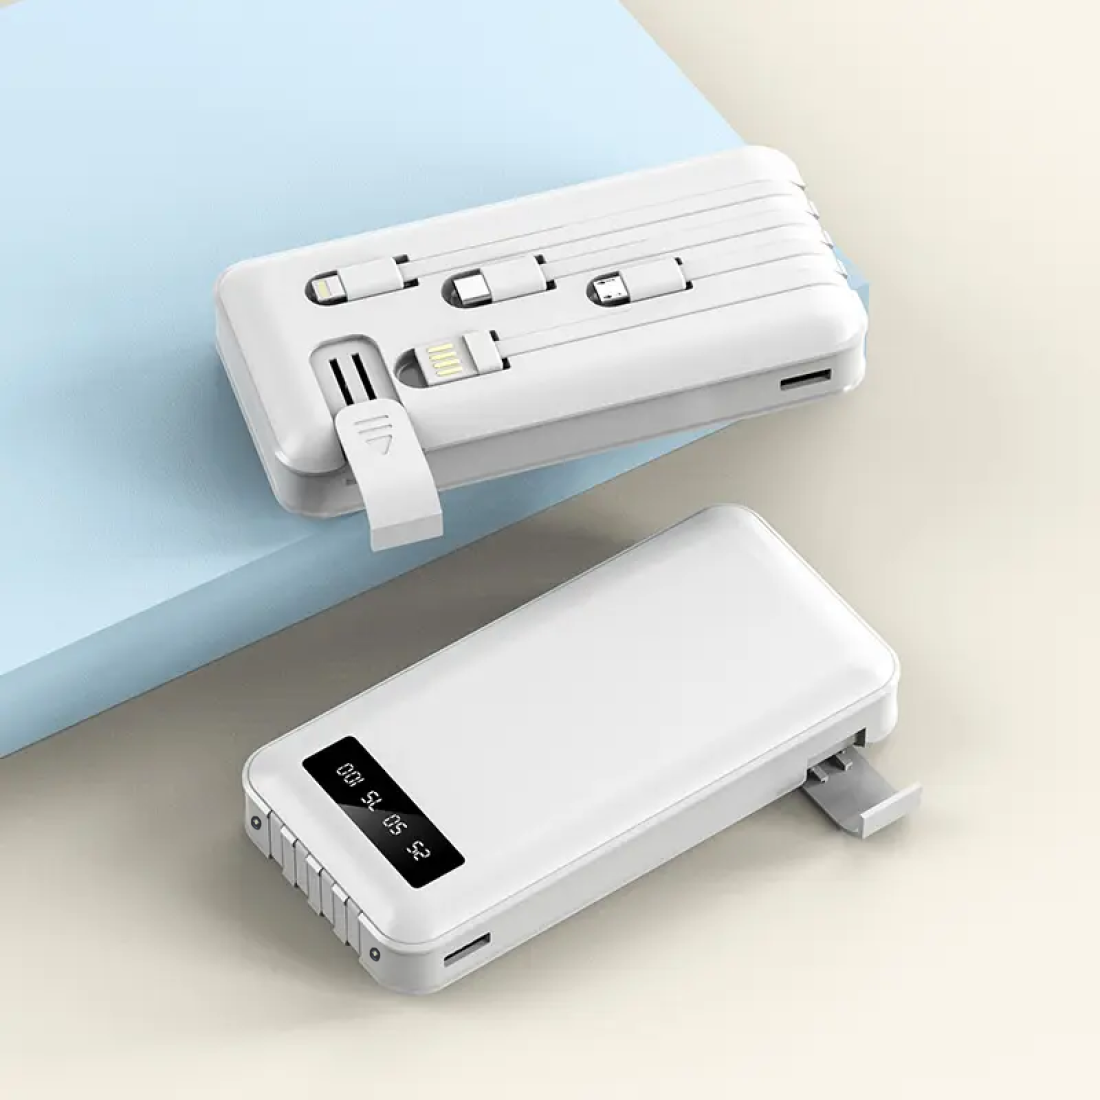 Digital display power bank comes with 4-wire 10000 mAh Capacity